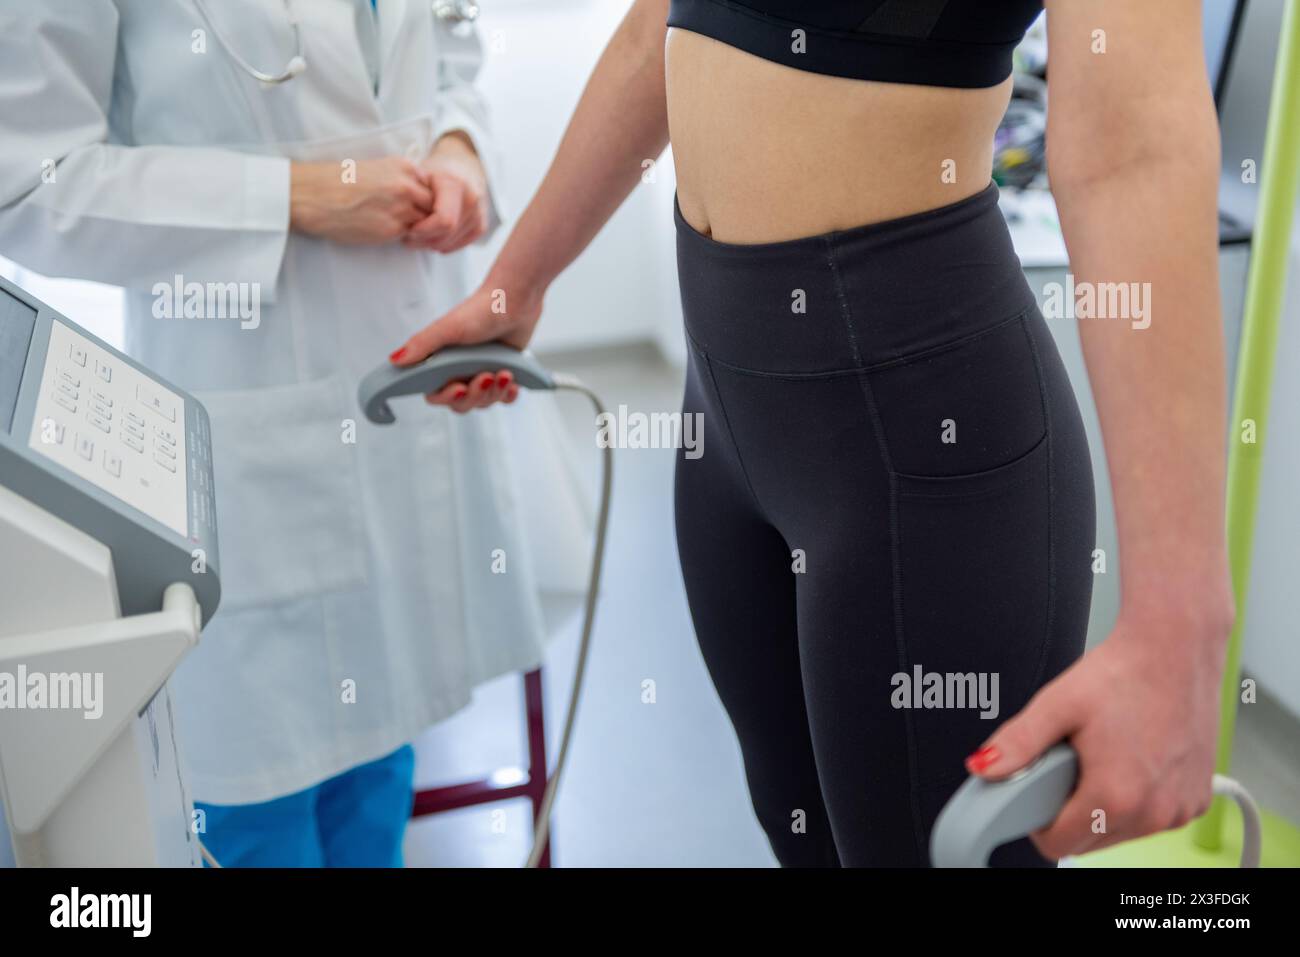 A health practitioner assists a woman with a body composition test using advanced equipment. Stock Photo